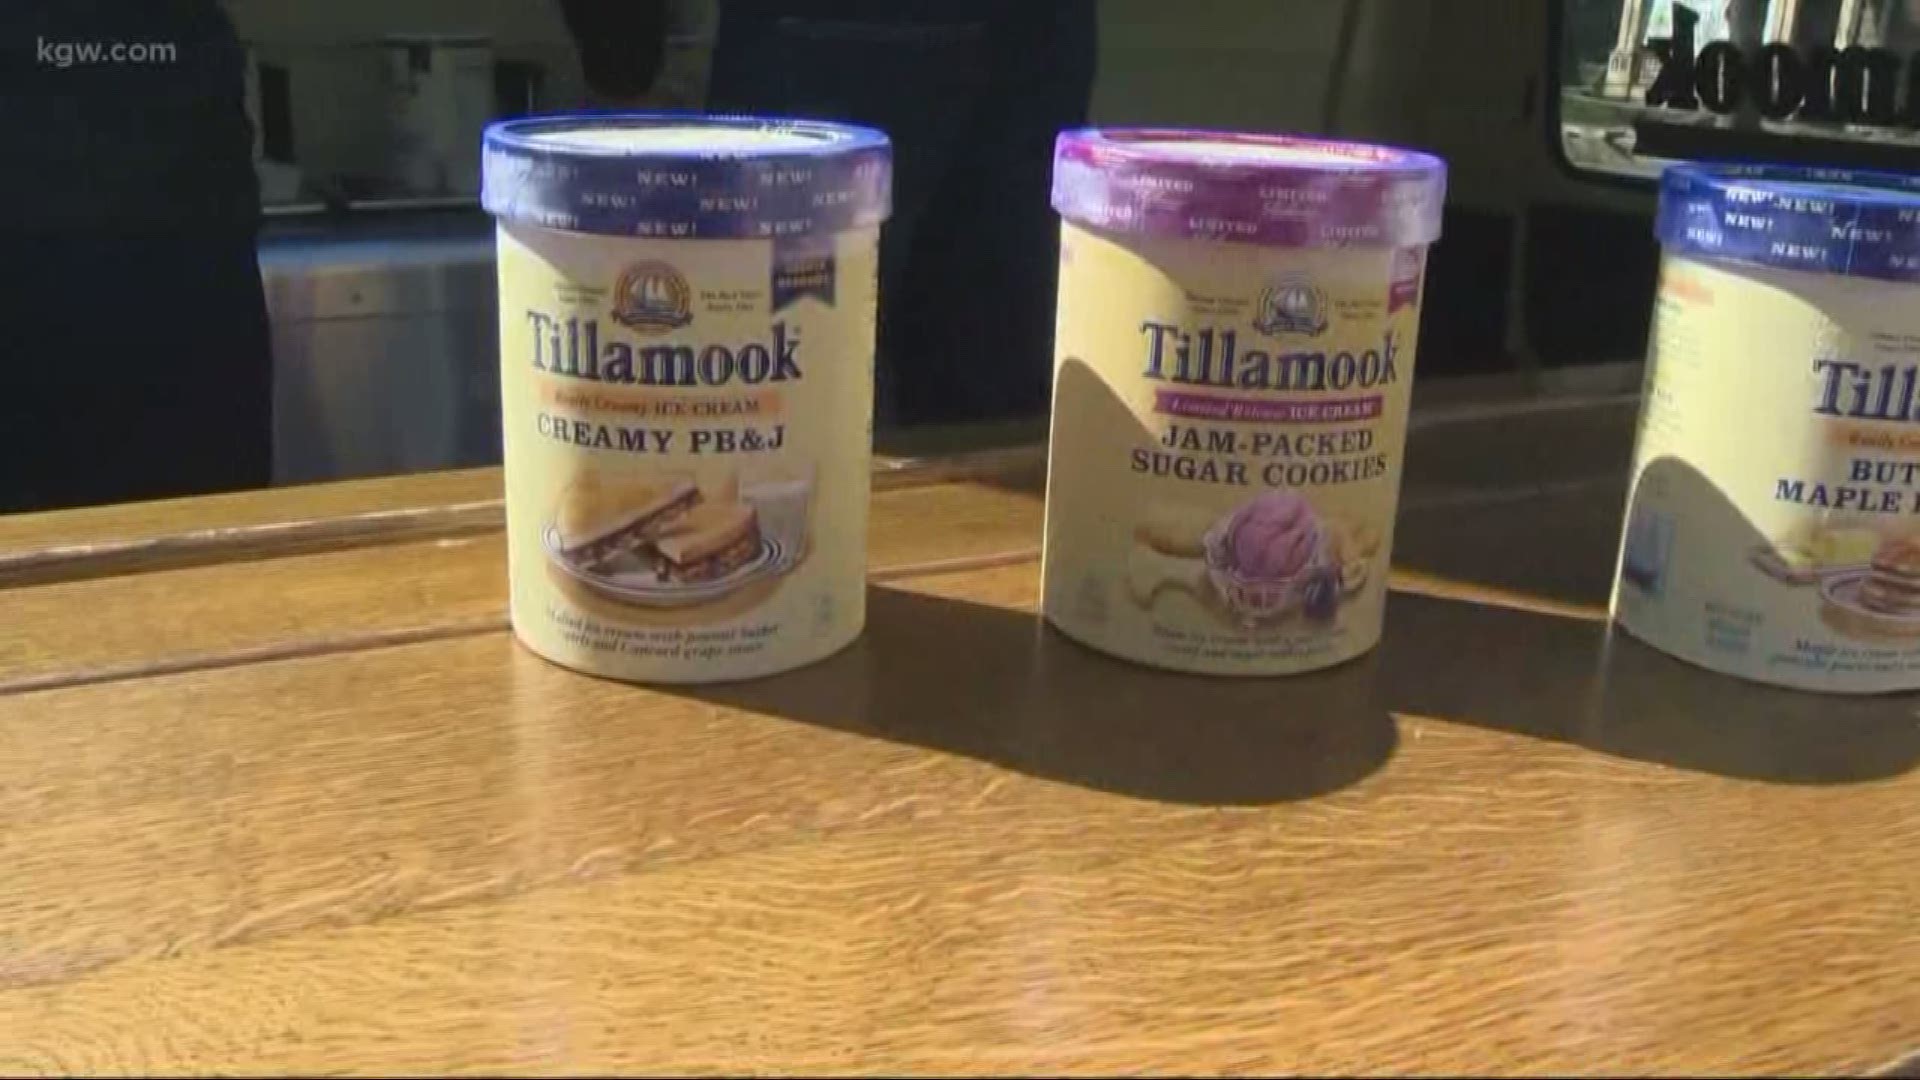 Tillamook gives away free ice cream for KGW Great Food Drive